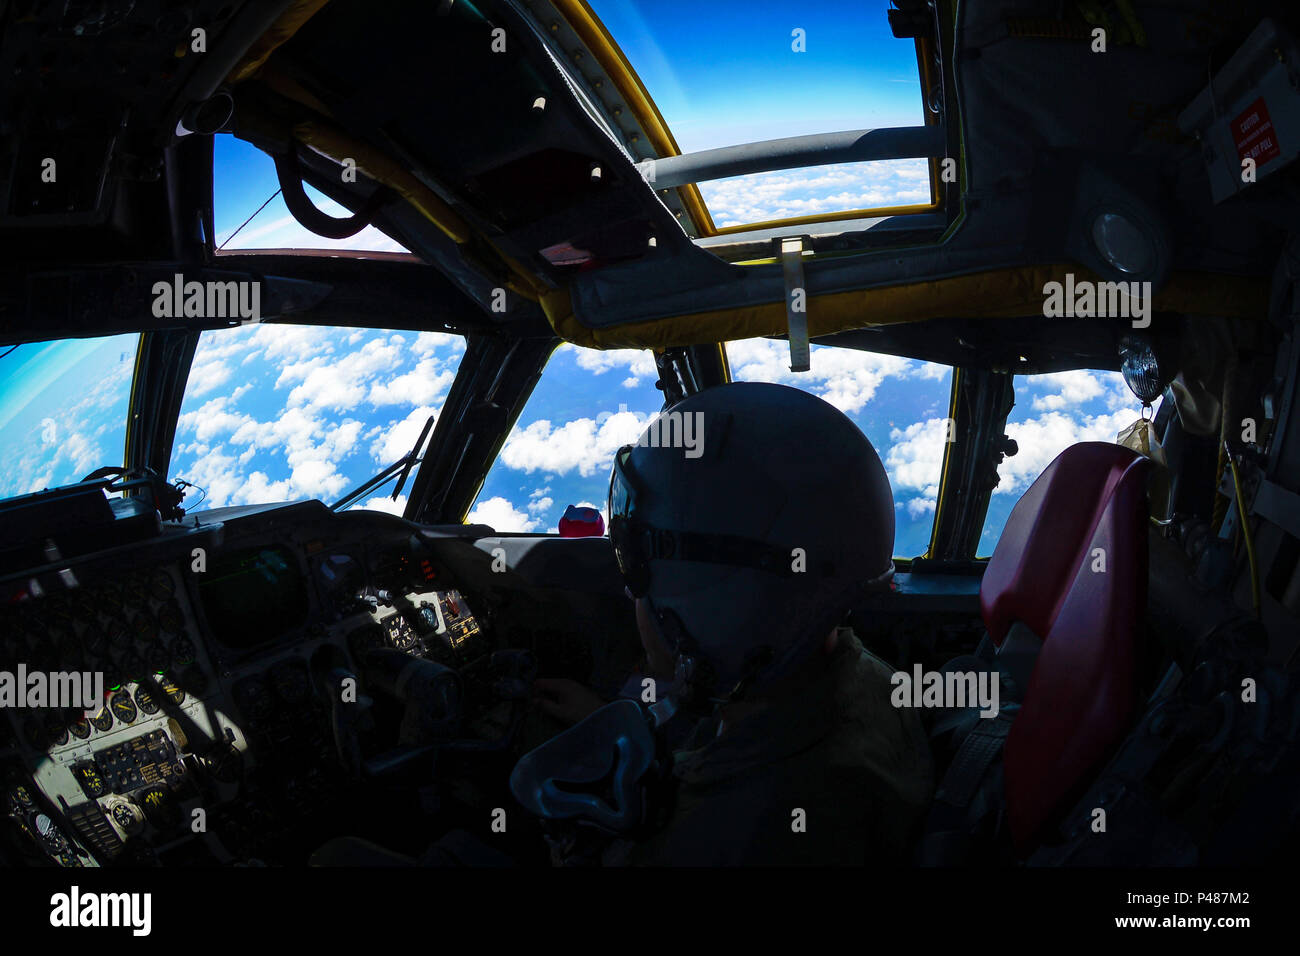 Lt. Col. Wade Karren, 11th Bomb Squadron commander, copilots a B-52 Stratofortress during a simulated bomb drop June 15, 2016. The bomb drop was part of a B-52 and B-1 Lancer integration flight fostering teamwork between bomber pilots of different aircraft. (U.S. Air Force photo/Senior Airman Luke Hill) Stock Photo